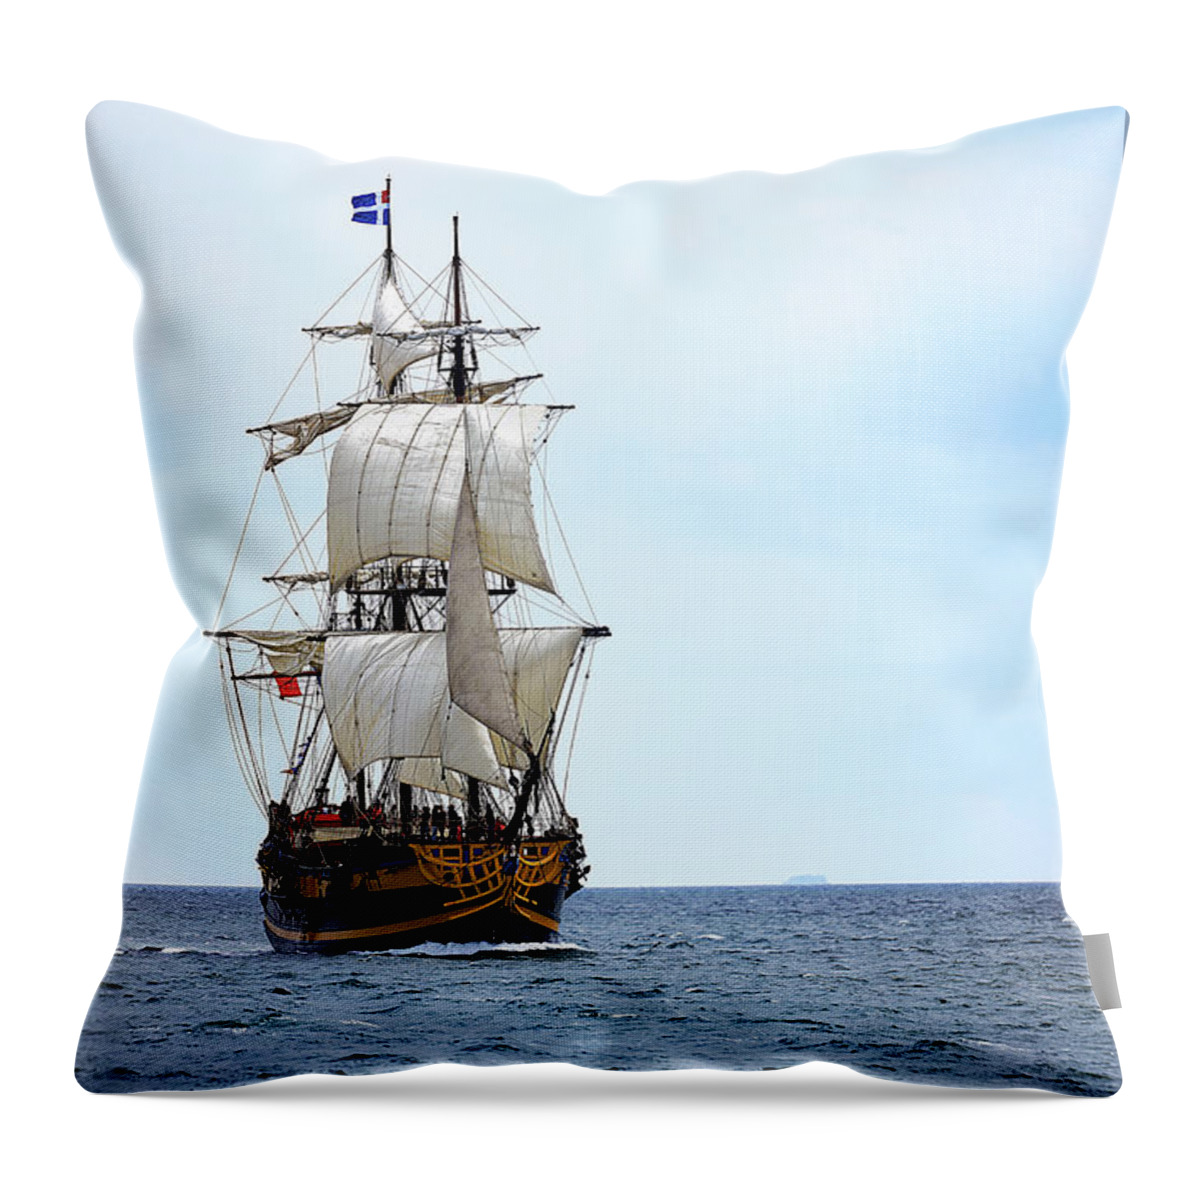 Cancalaise Throw Pillow featuring the photograph The King's Star' by Frederic Bourrigaud